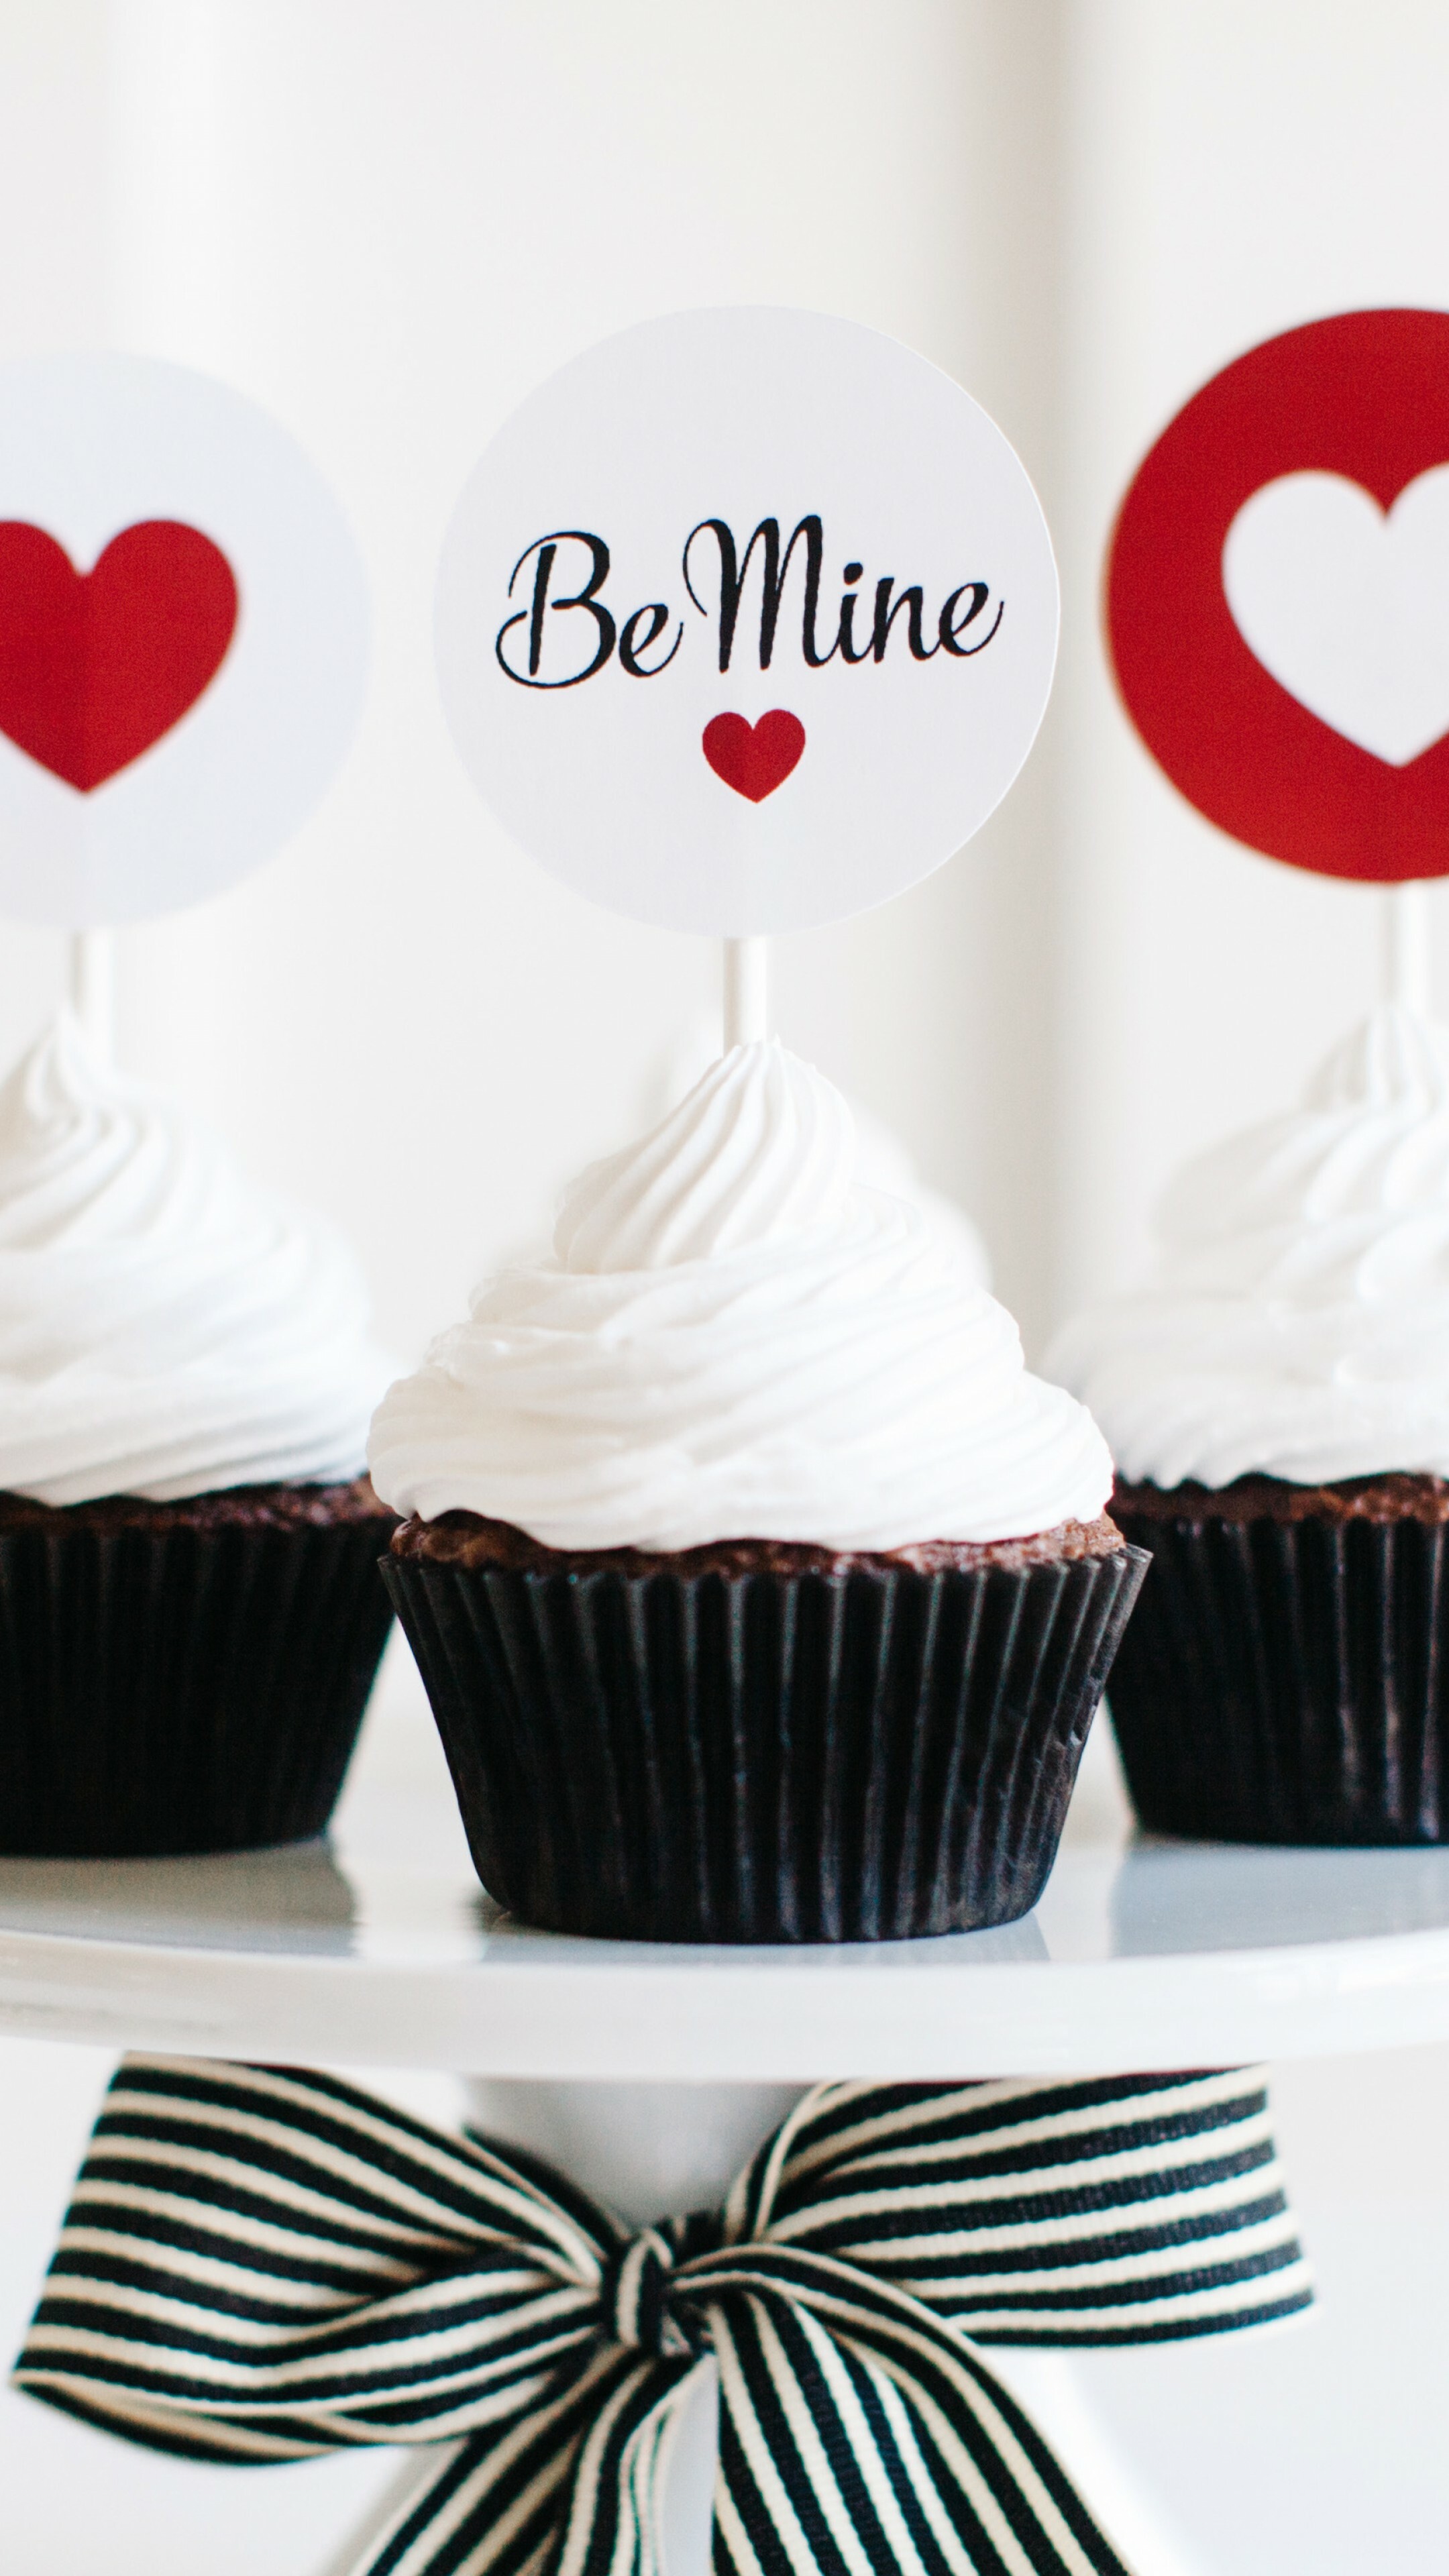 Valentine's Day: A holiday of romantic dinners, Cupcakes. 2160x3840 4K Wallpaper.